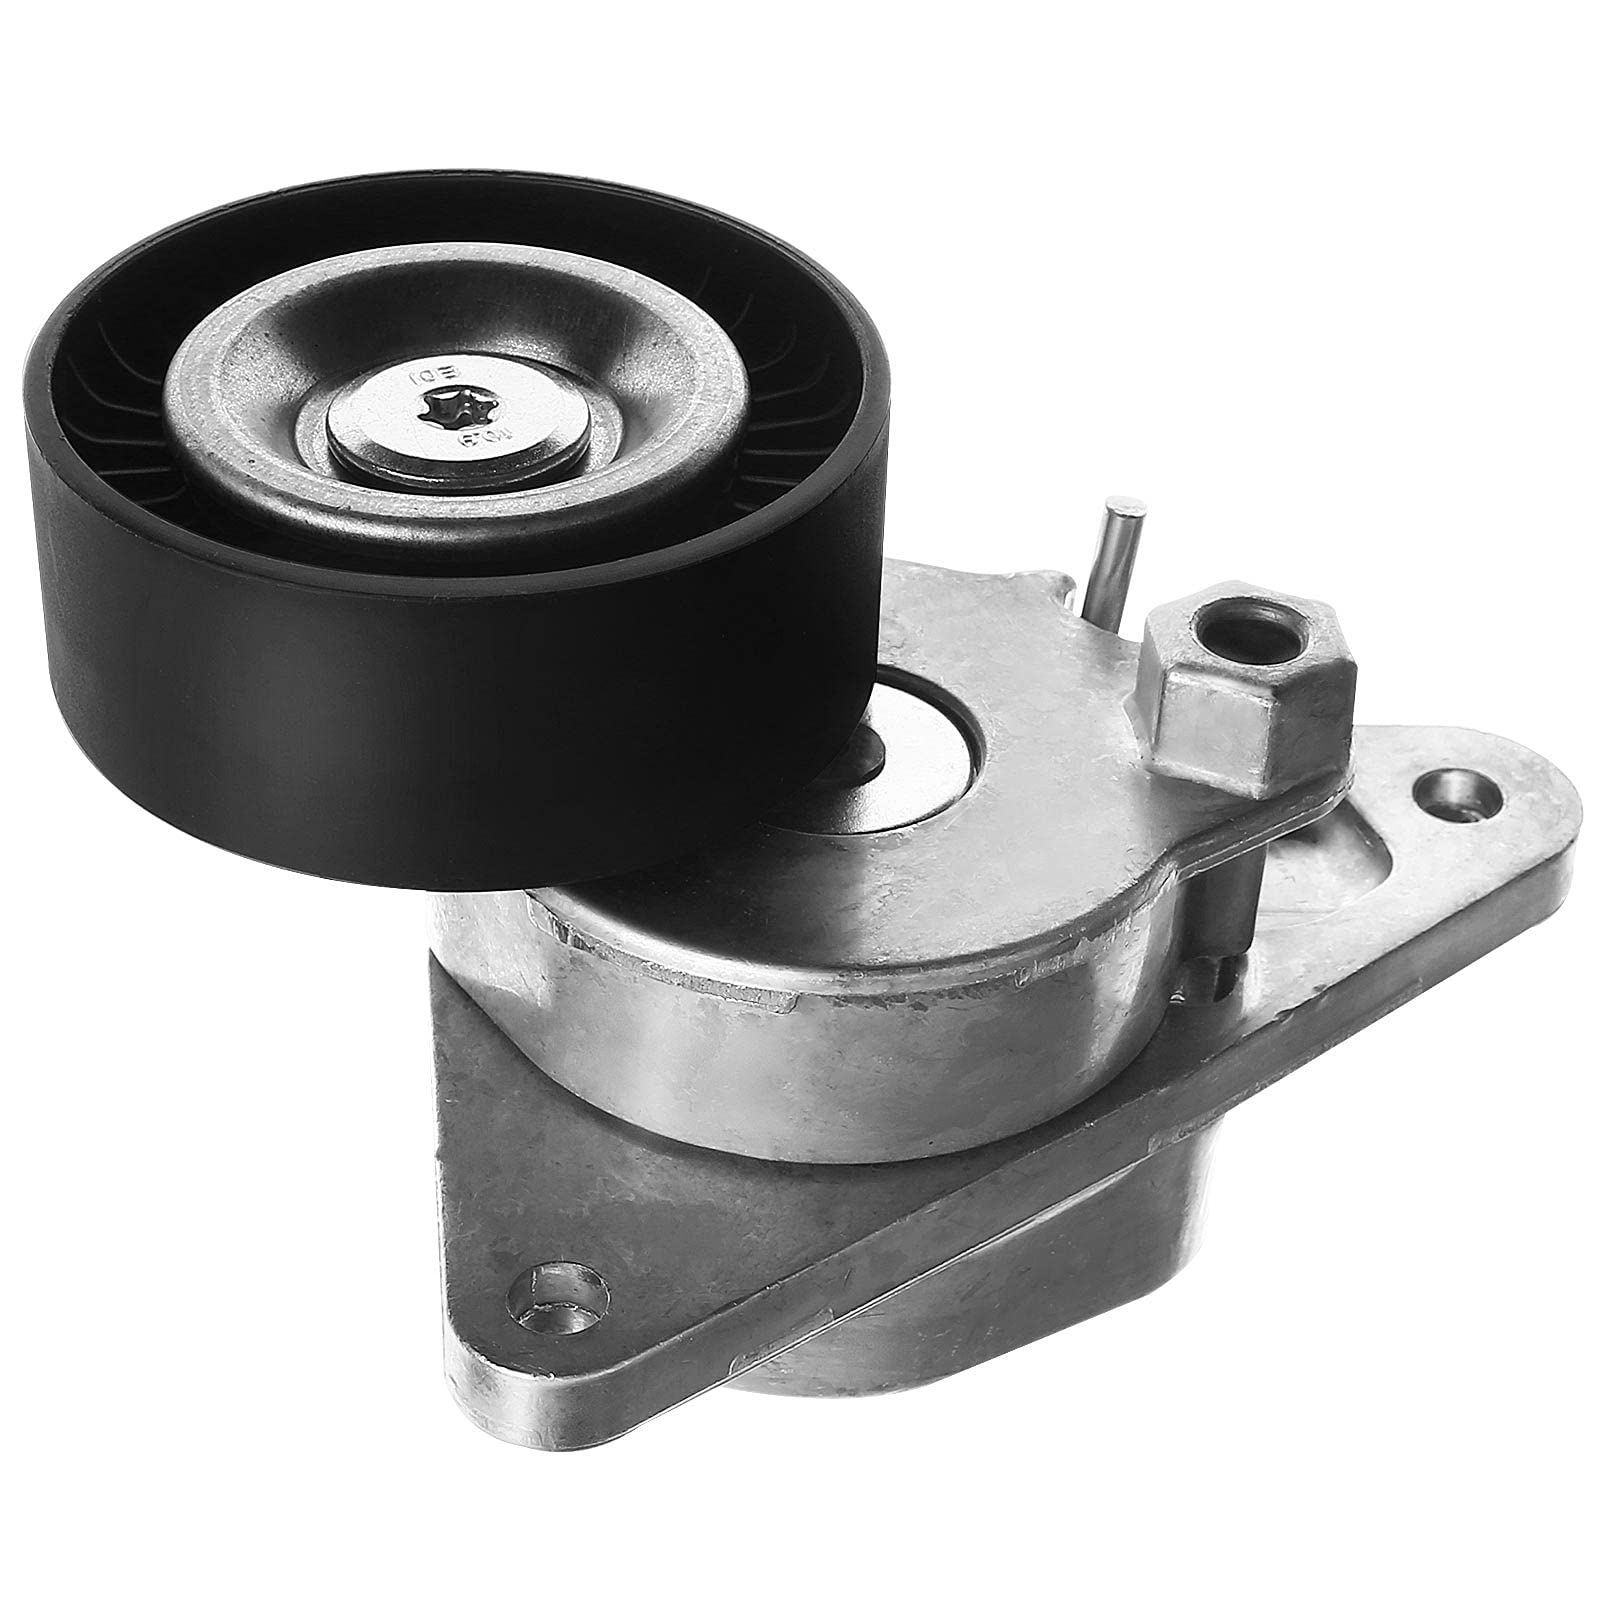 Revamp Your Ride: Mercedes-Benz CL600 Transmission Belt Pulley Replacement